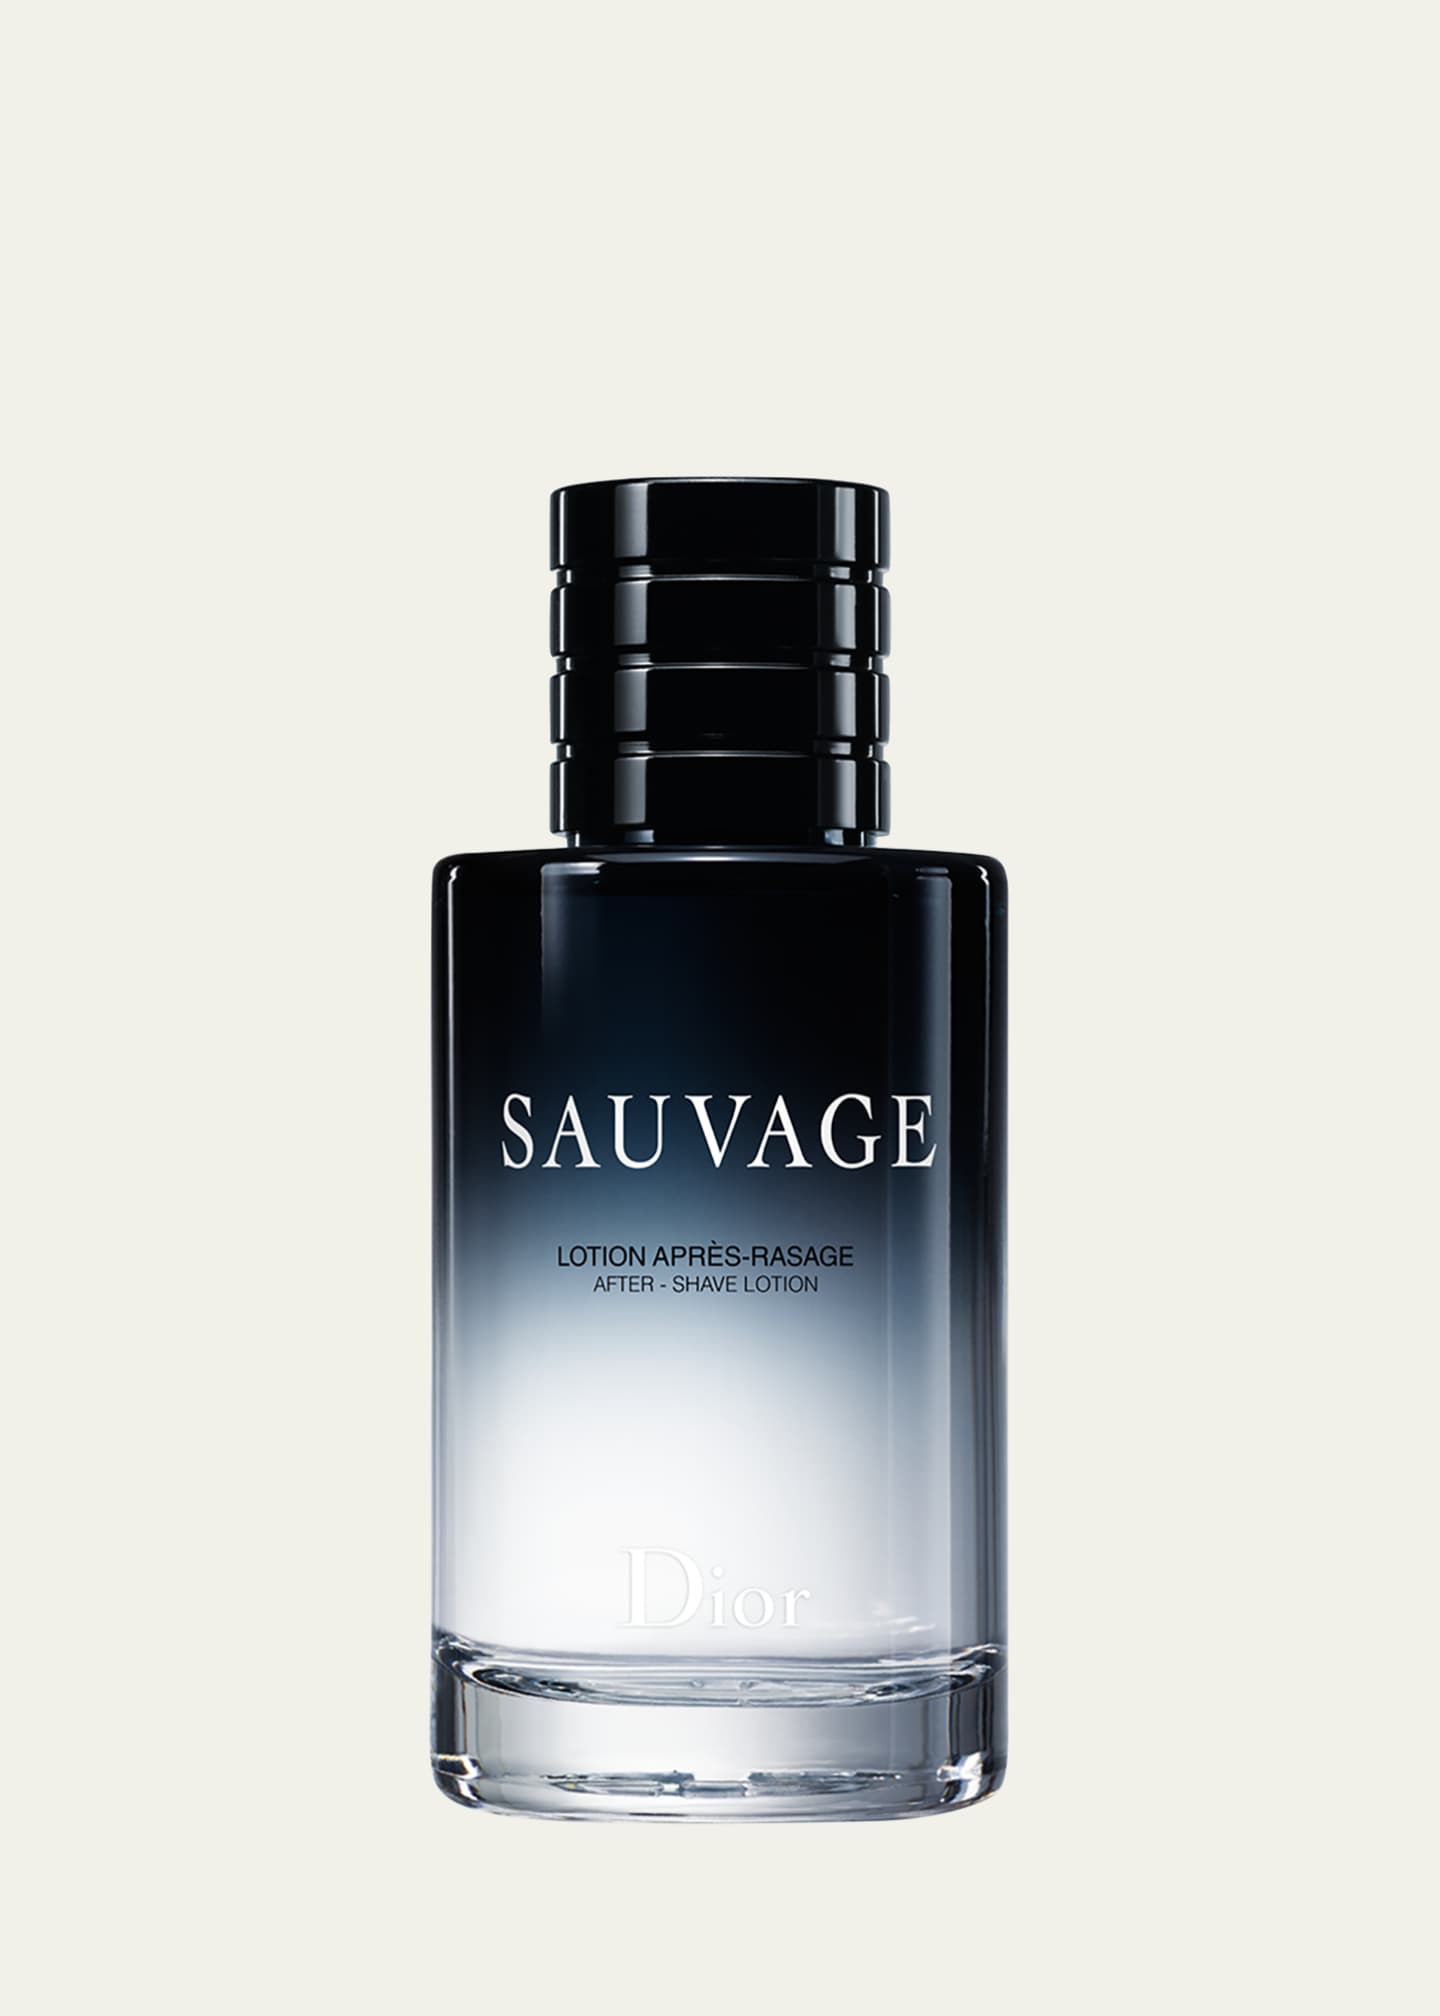 Dior Sauvage After-Shave Lotion, 3.4 oz. - Bergdorf Goodman